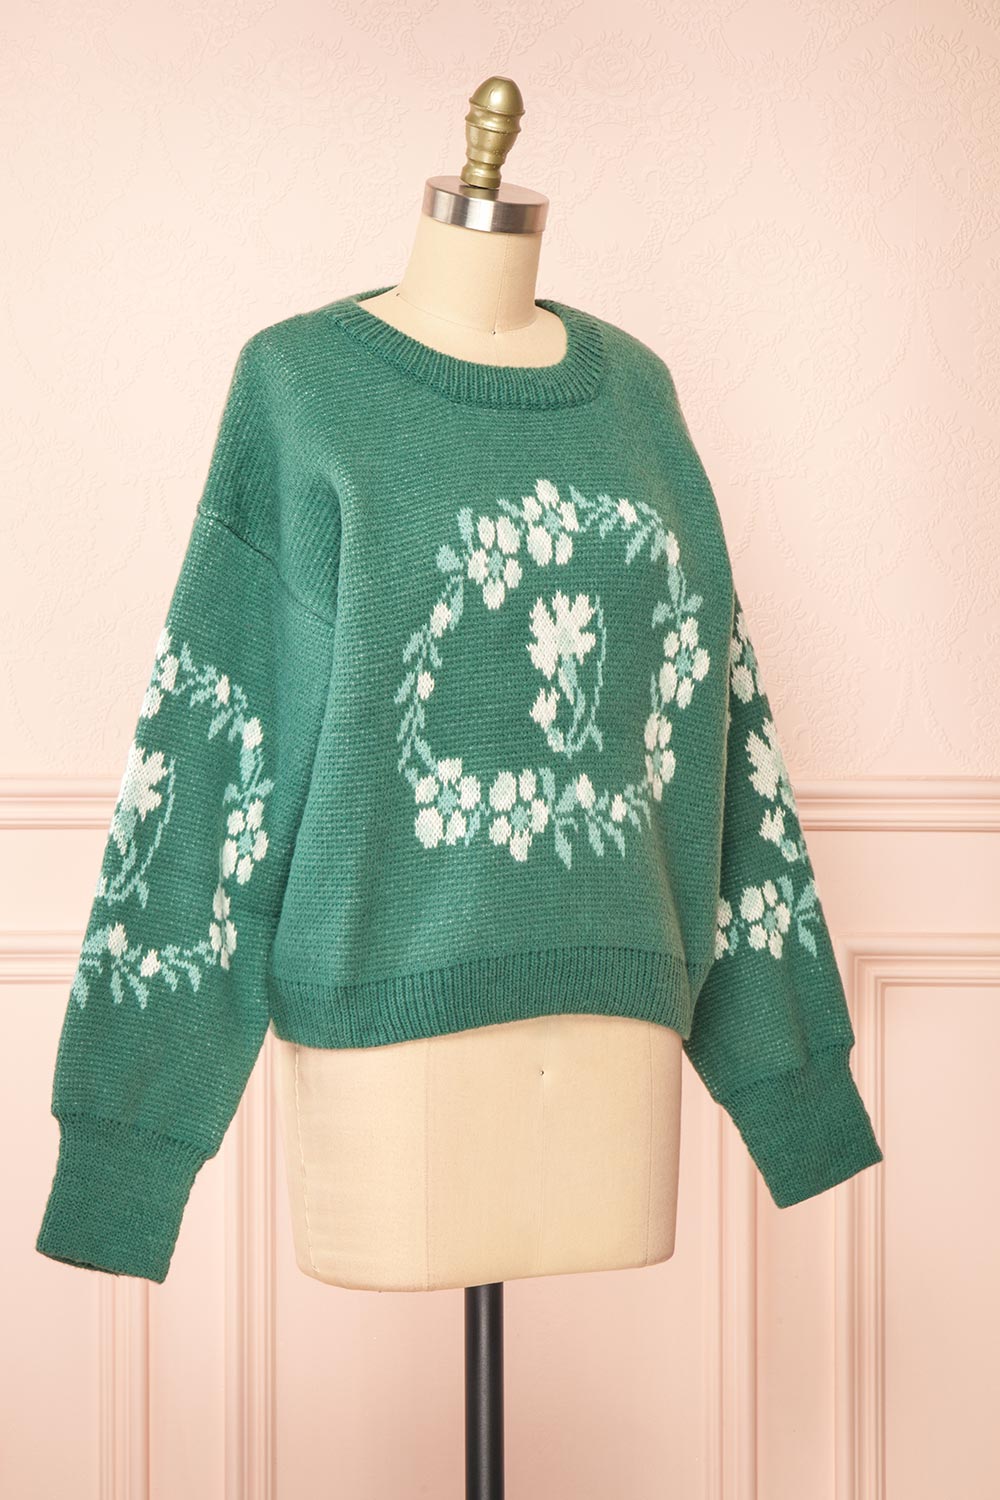 Monrovia Green Floral Patterned Knit Sweater | Boutique 1861 side view